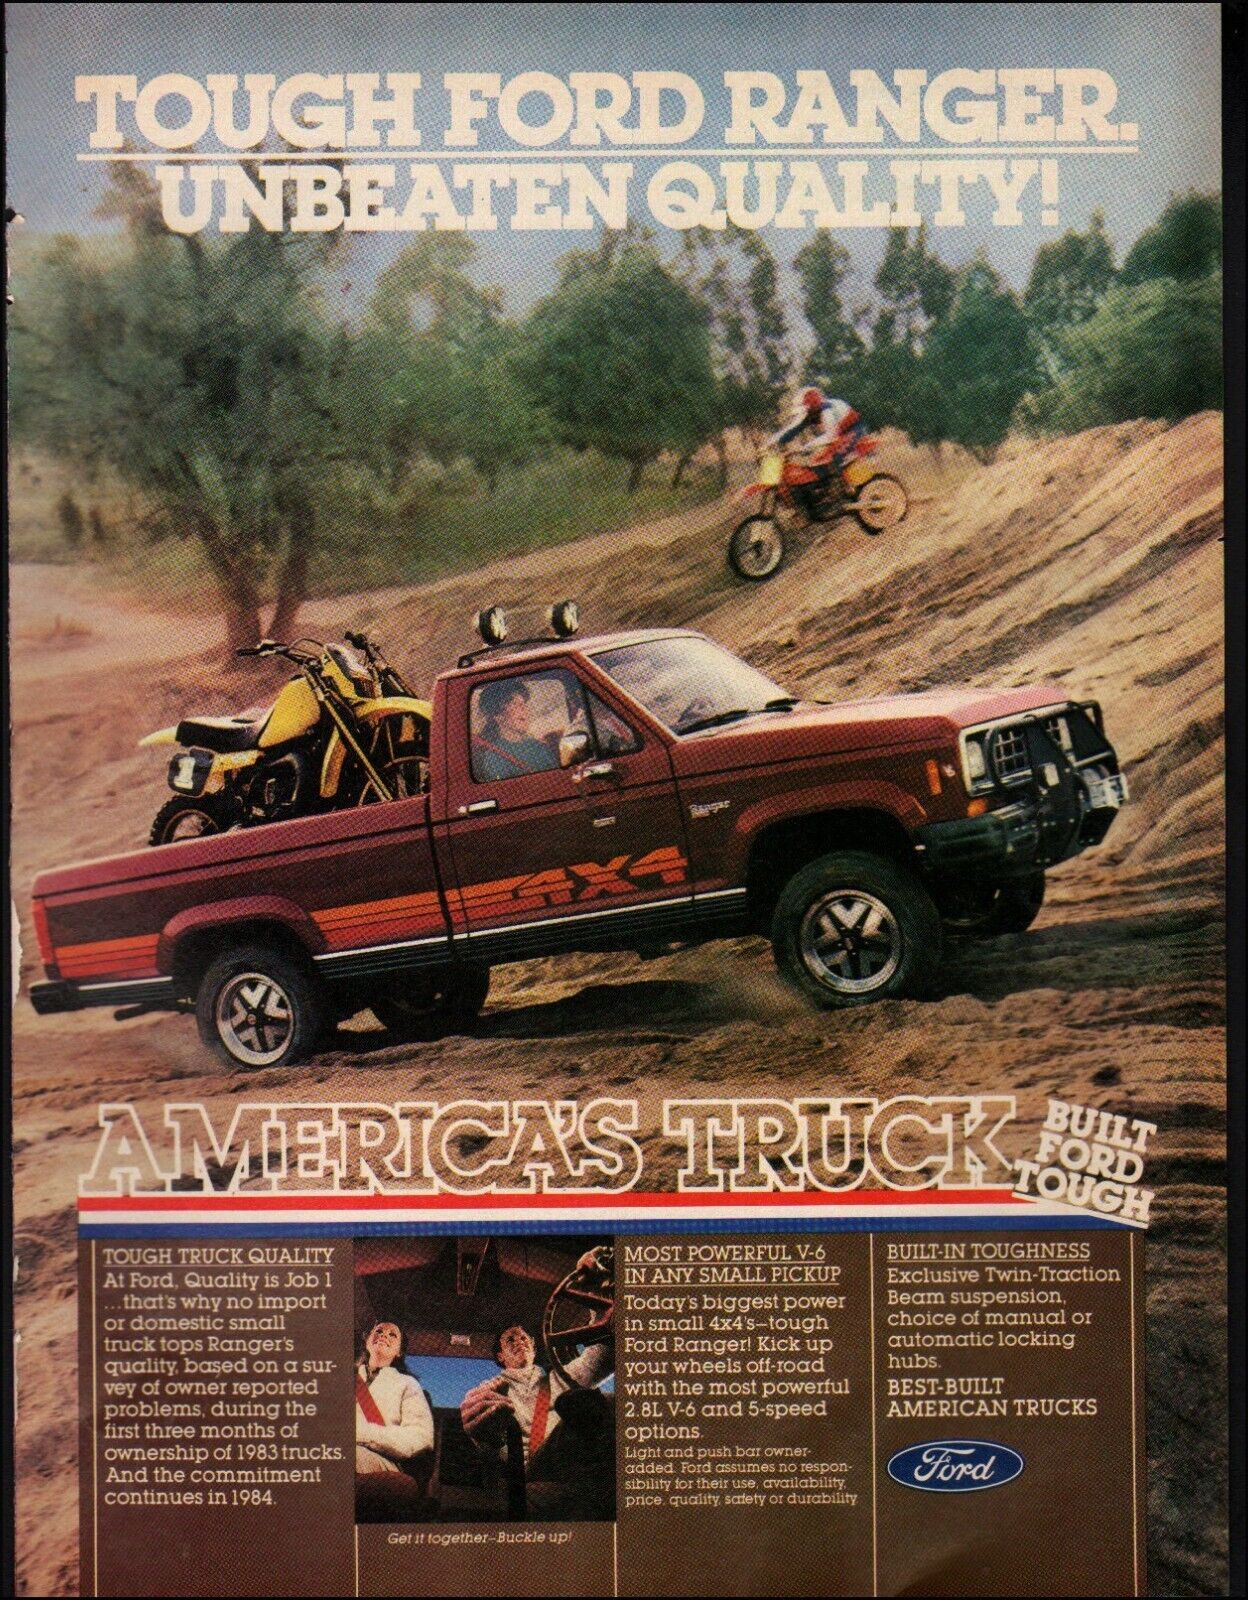 1984 Vintage ad Ford Ranger retro truck 4x4 Brown motorcycle photo    05/11/23